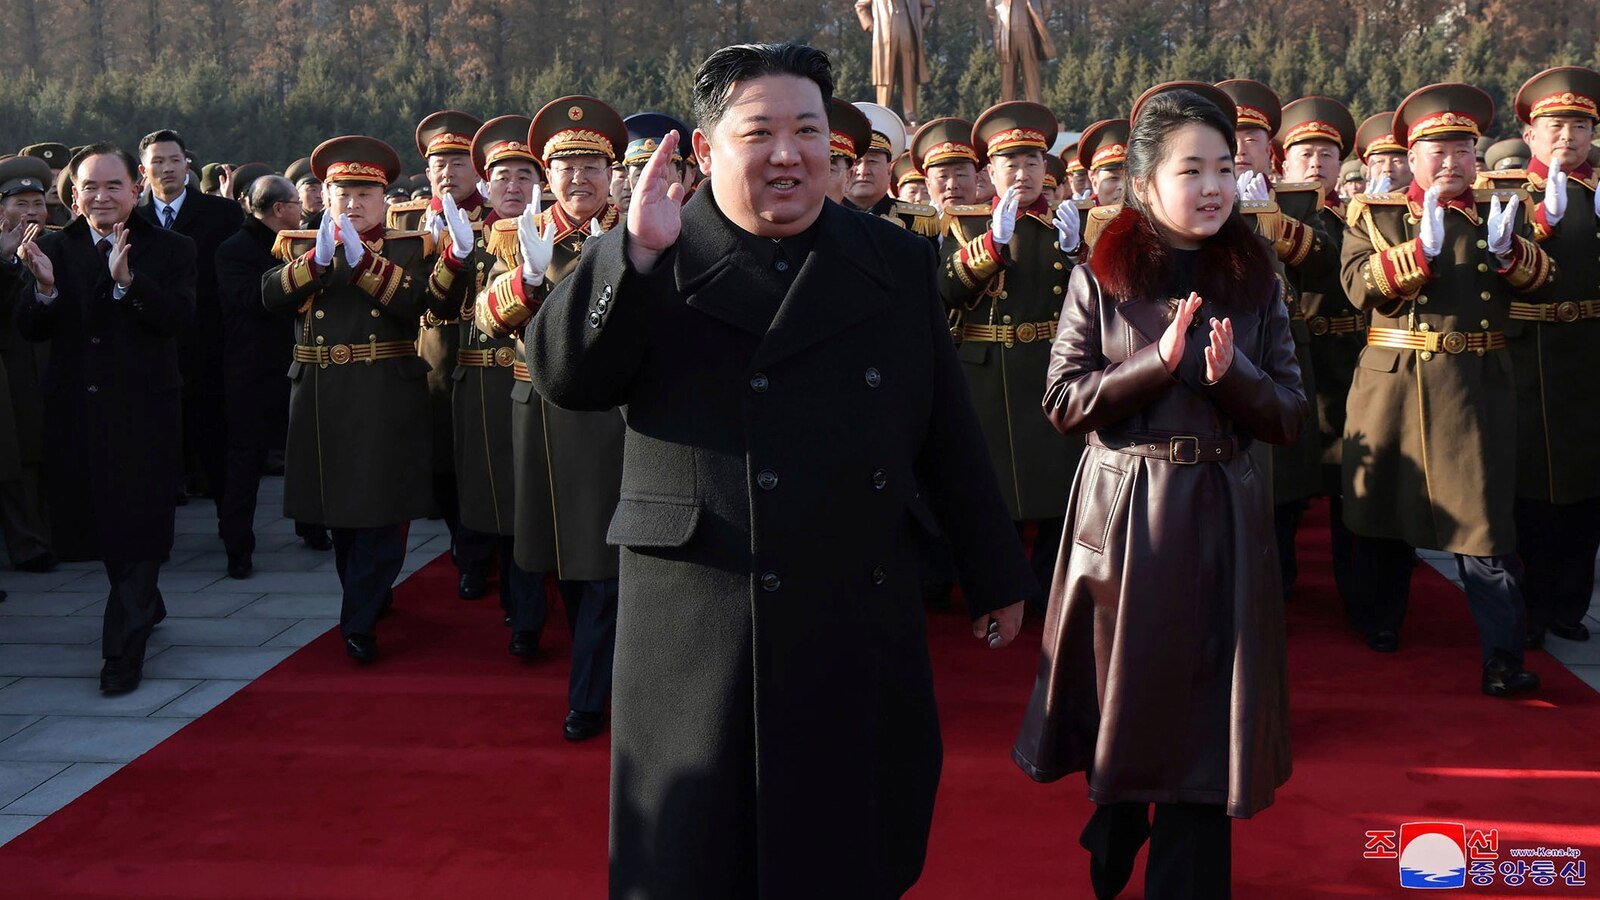 Seoul reports North Korean officials are seeking medicines for Kim's obesity-related health issues